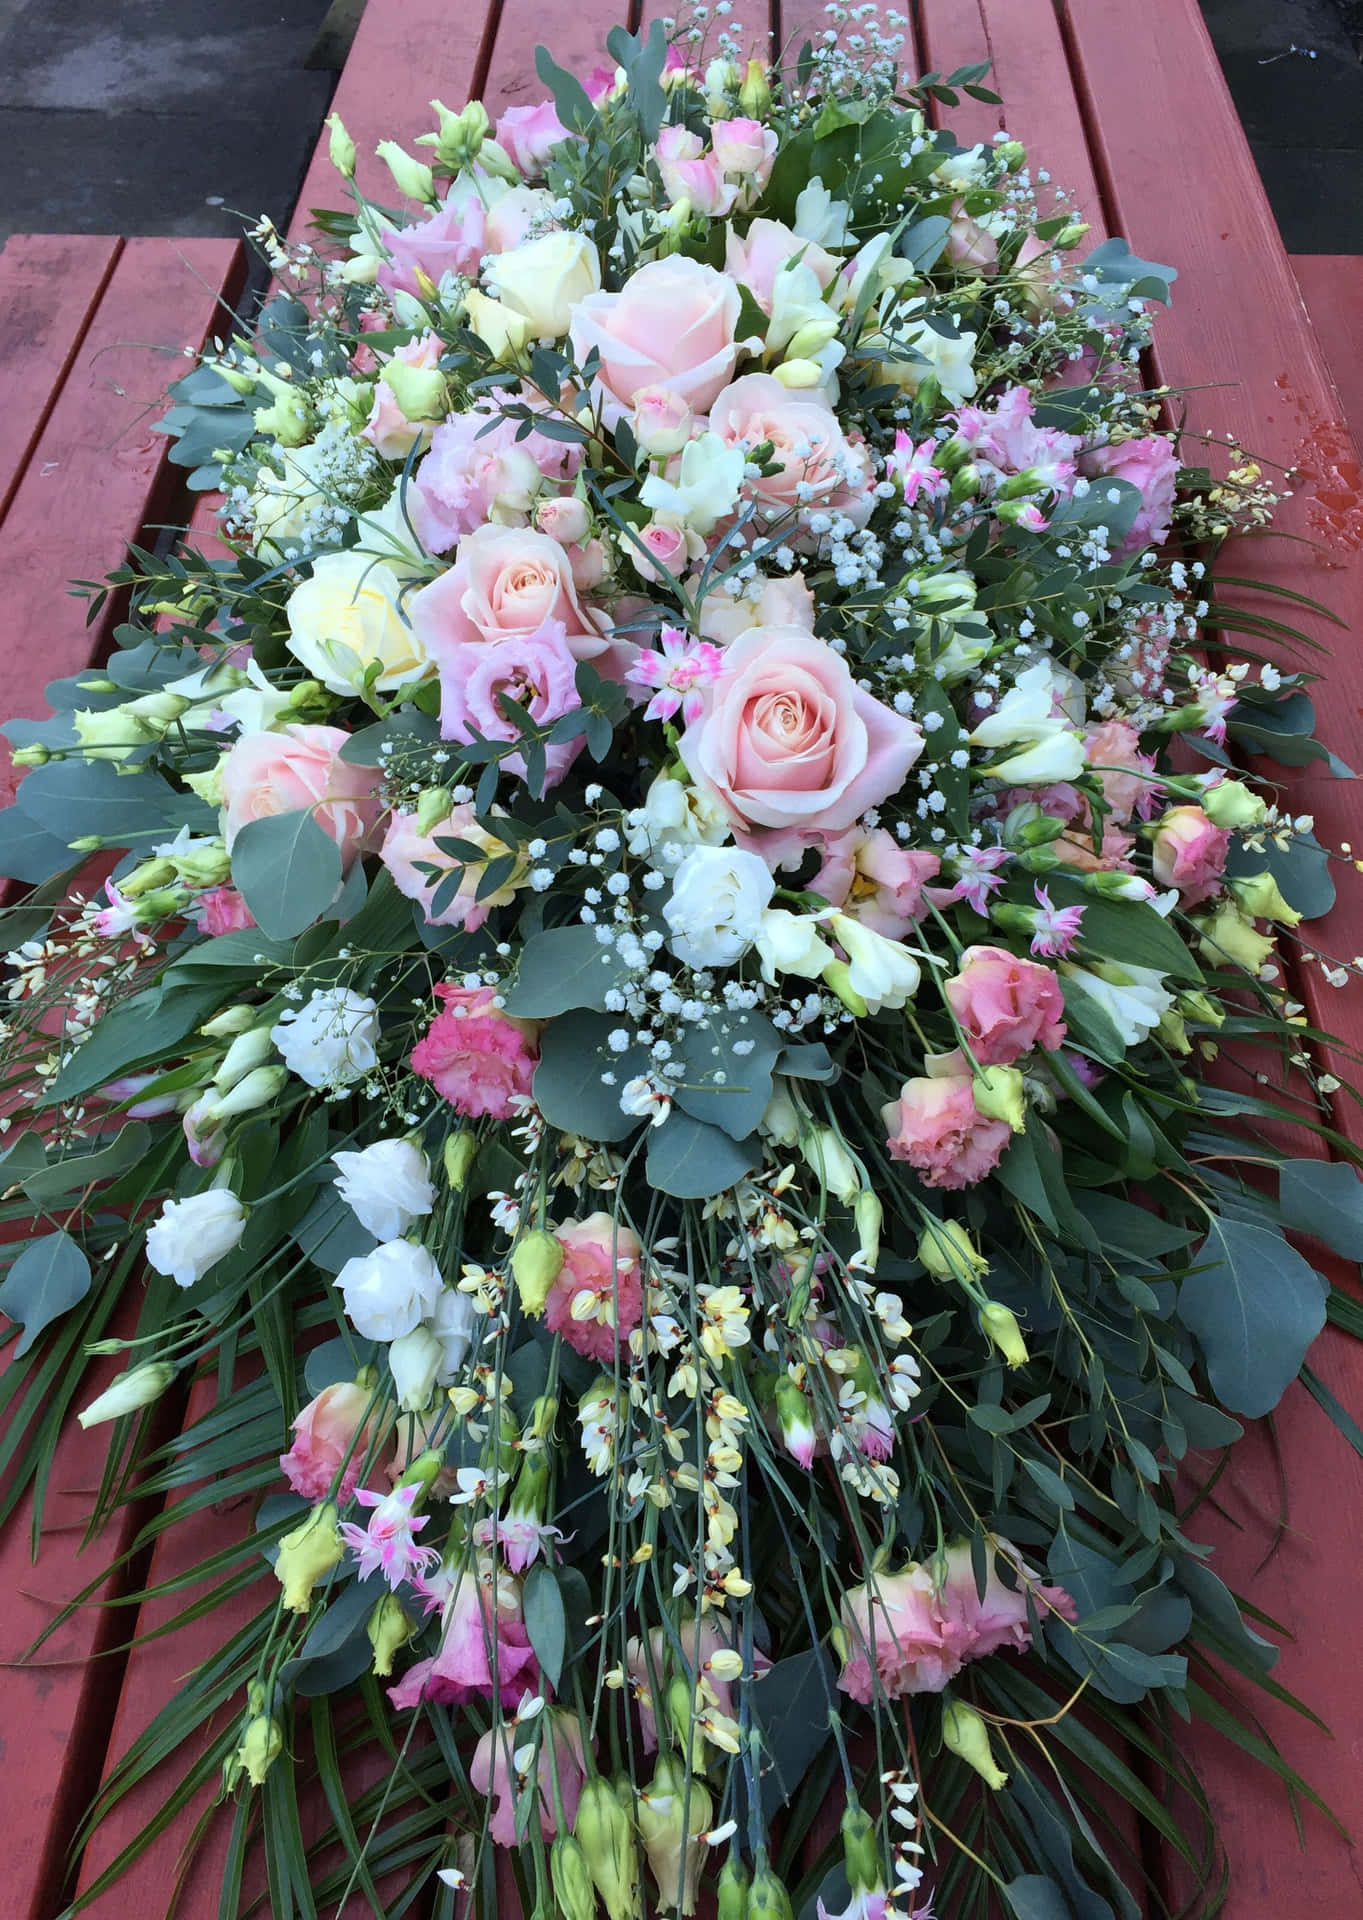 Express Your Sympathy with Beautiful Funeral Flower Arrangements